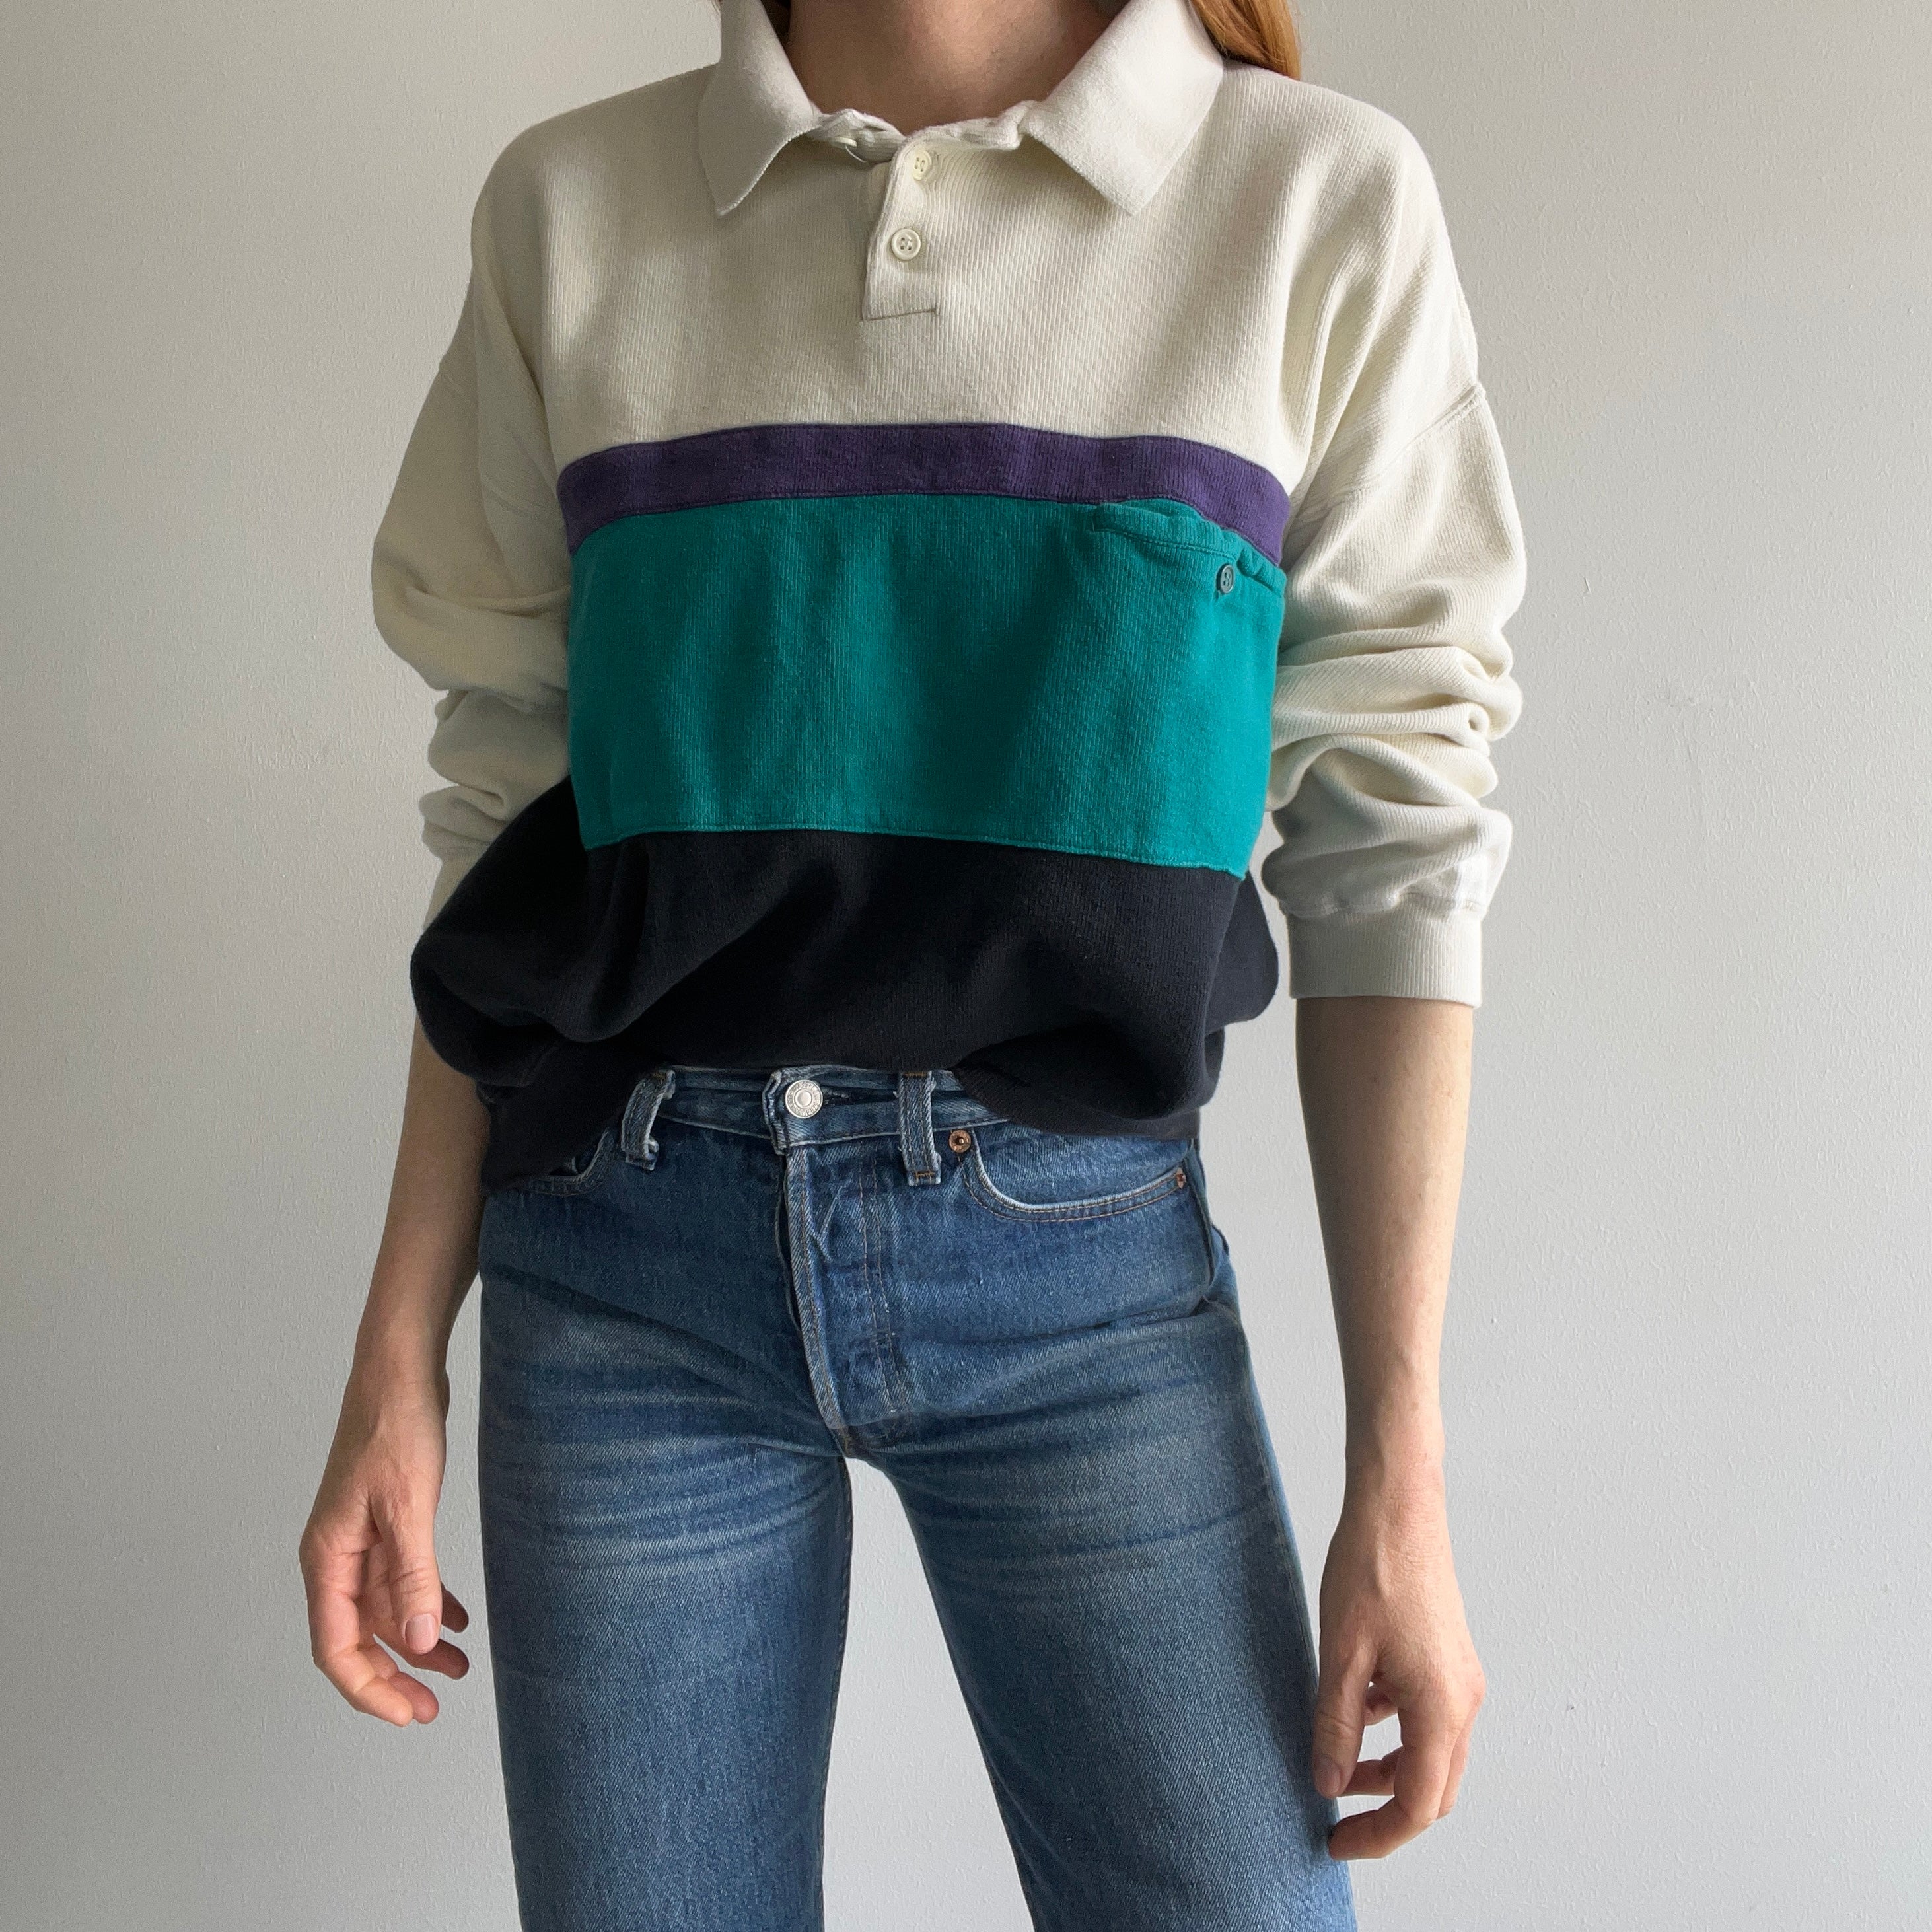 1990s !!!!!!!!!! Cotton Knit Collared Color Block Sweater/Sweatshirt